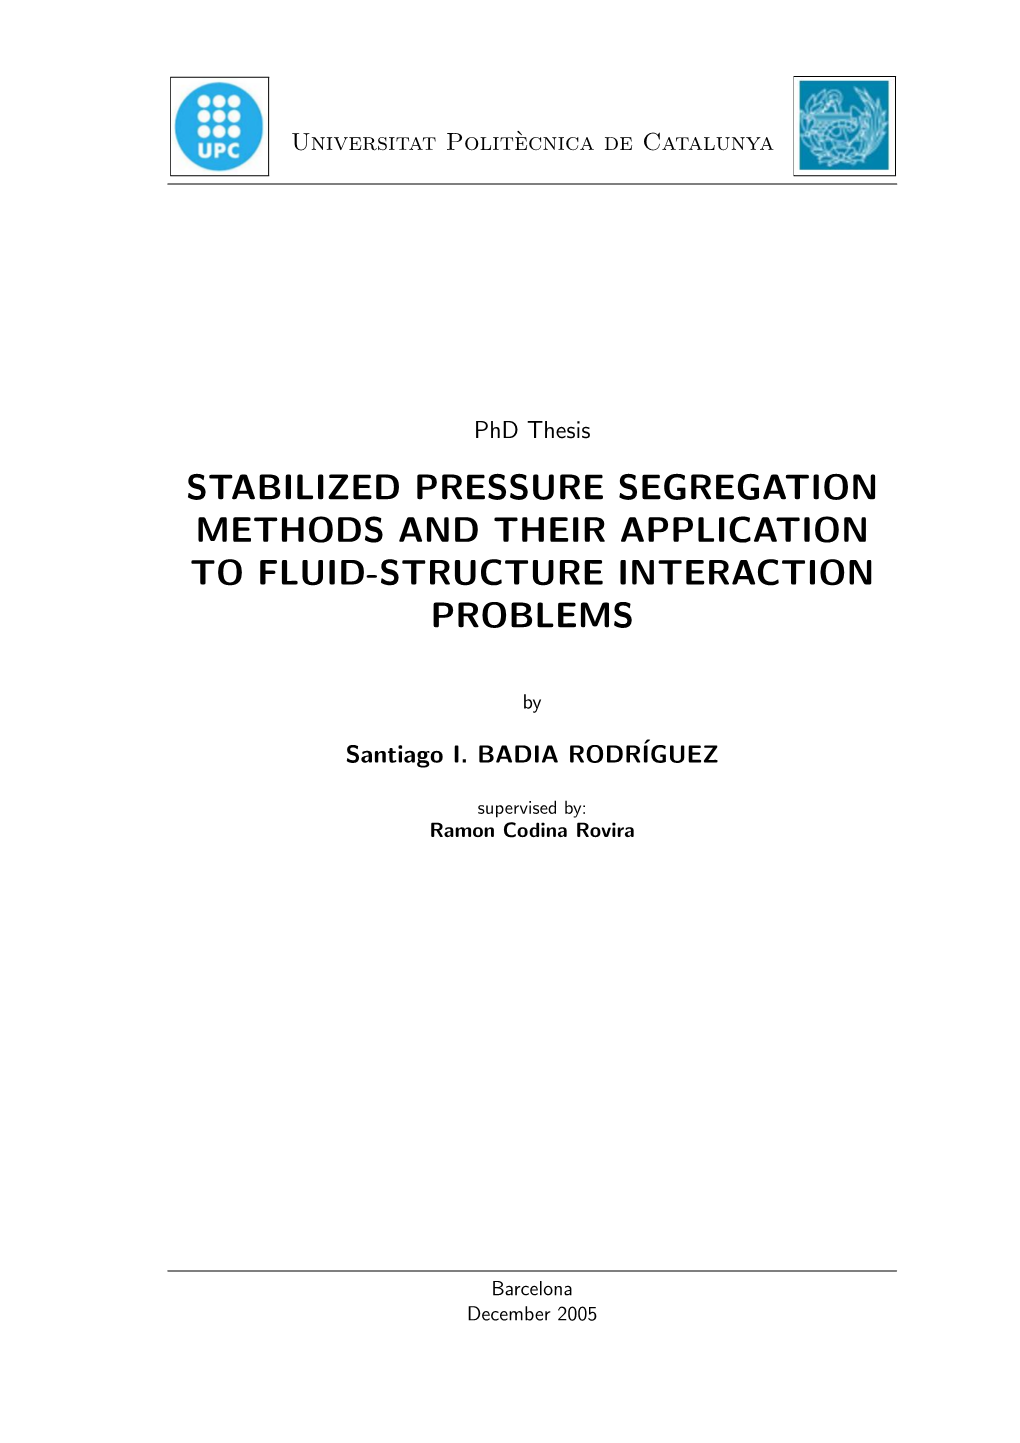 Stabilized Pressure Segregation Methods and Their Application to Fluid-Structure Interaction Problems